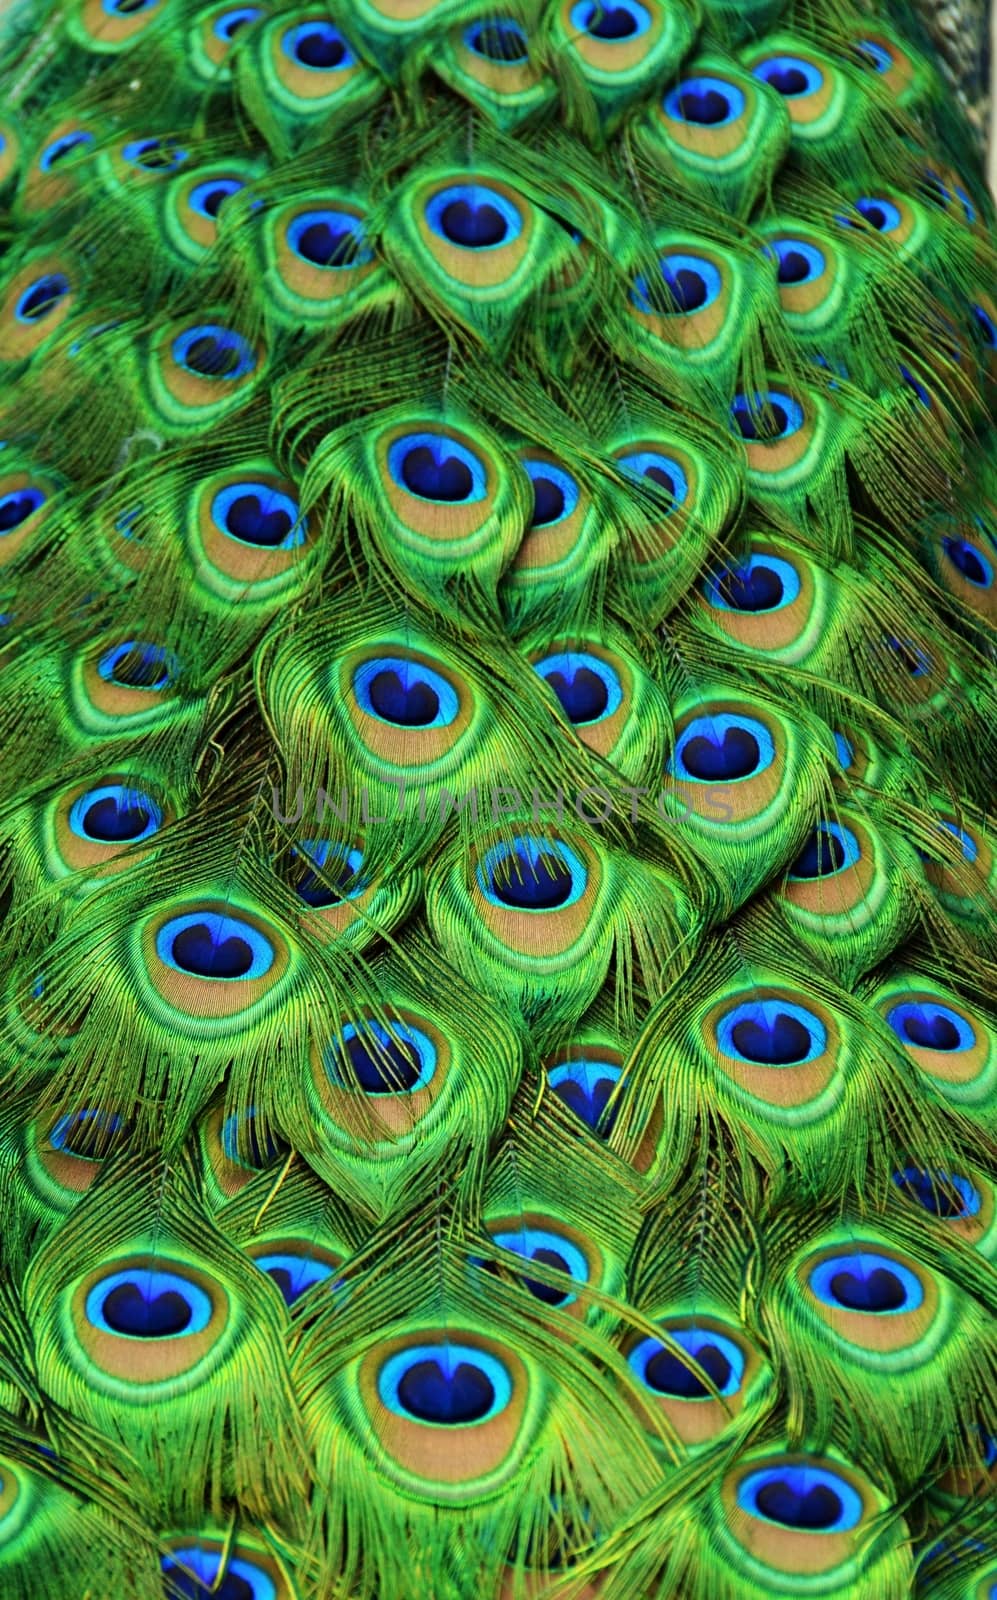 Peacock Feathers by MFitzsimmons